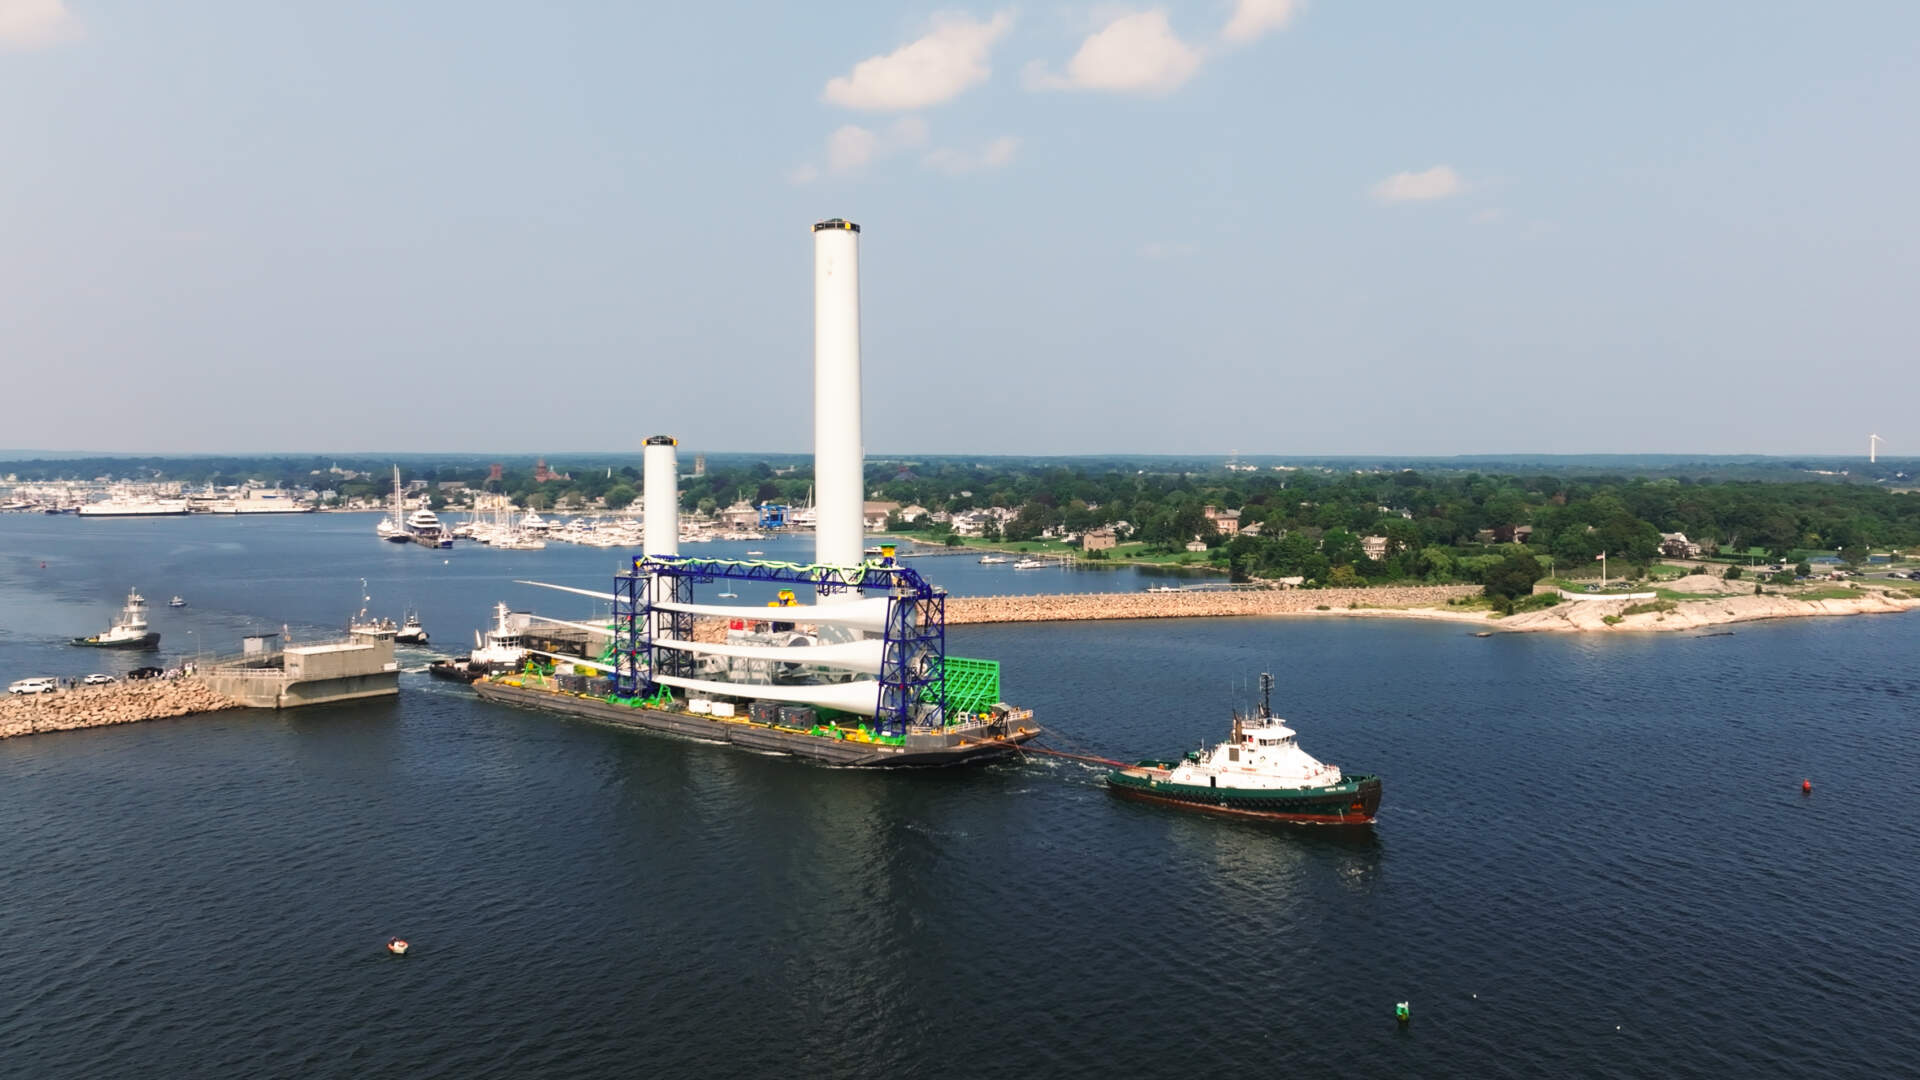 The Foss Prevailing Wind, a specialized barge, carries wind turbine components from New Bedford to the wind lease area near Martha's Vineyard. (Courtesy of Vineyard Wind.)